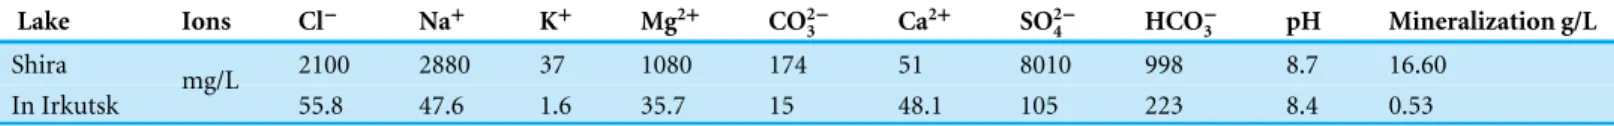 Table 1 Chemical composition of the surface water from brackish Lake Shira and a freshwater lake in Irkutsk (Data for Lake Shira from Kalacheva et al., 2002 ).